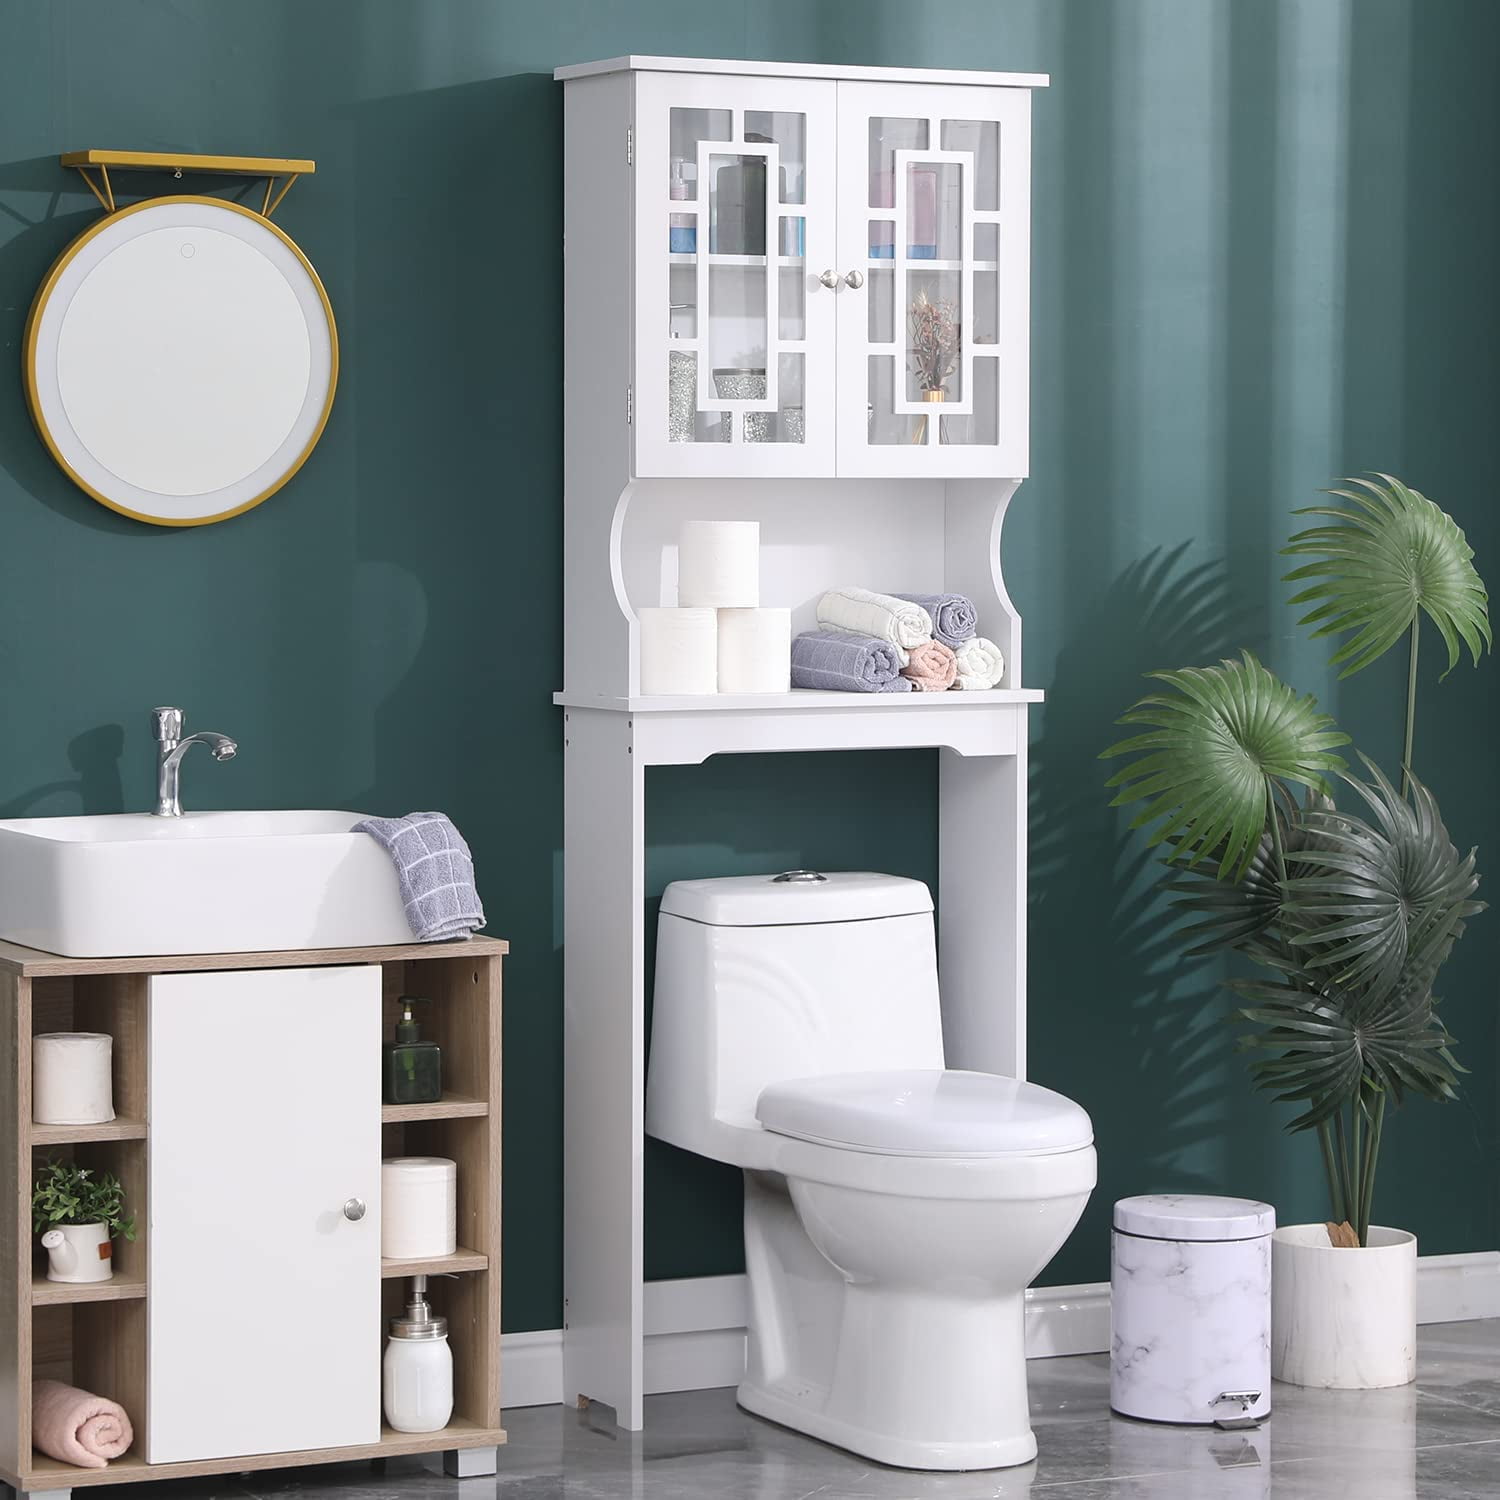 Utex Bathroom Cabinet Wall Mounted, Wood Hanging Cabinet, Wall Cabinets with Doors and Shelves Over The Toilet for Bathroom,White, Size: 1